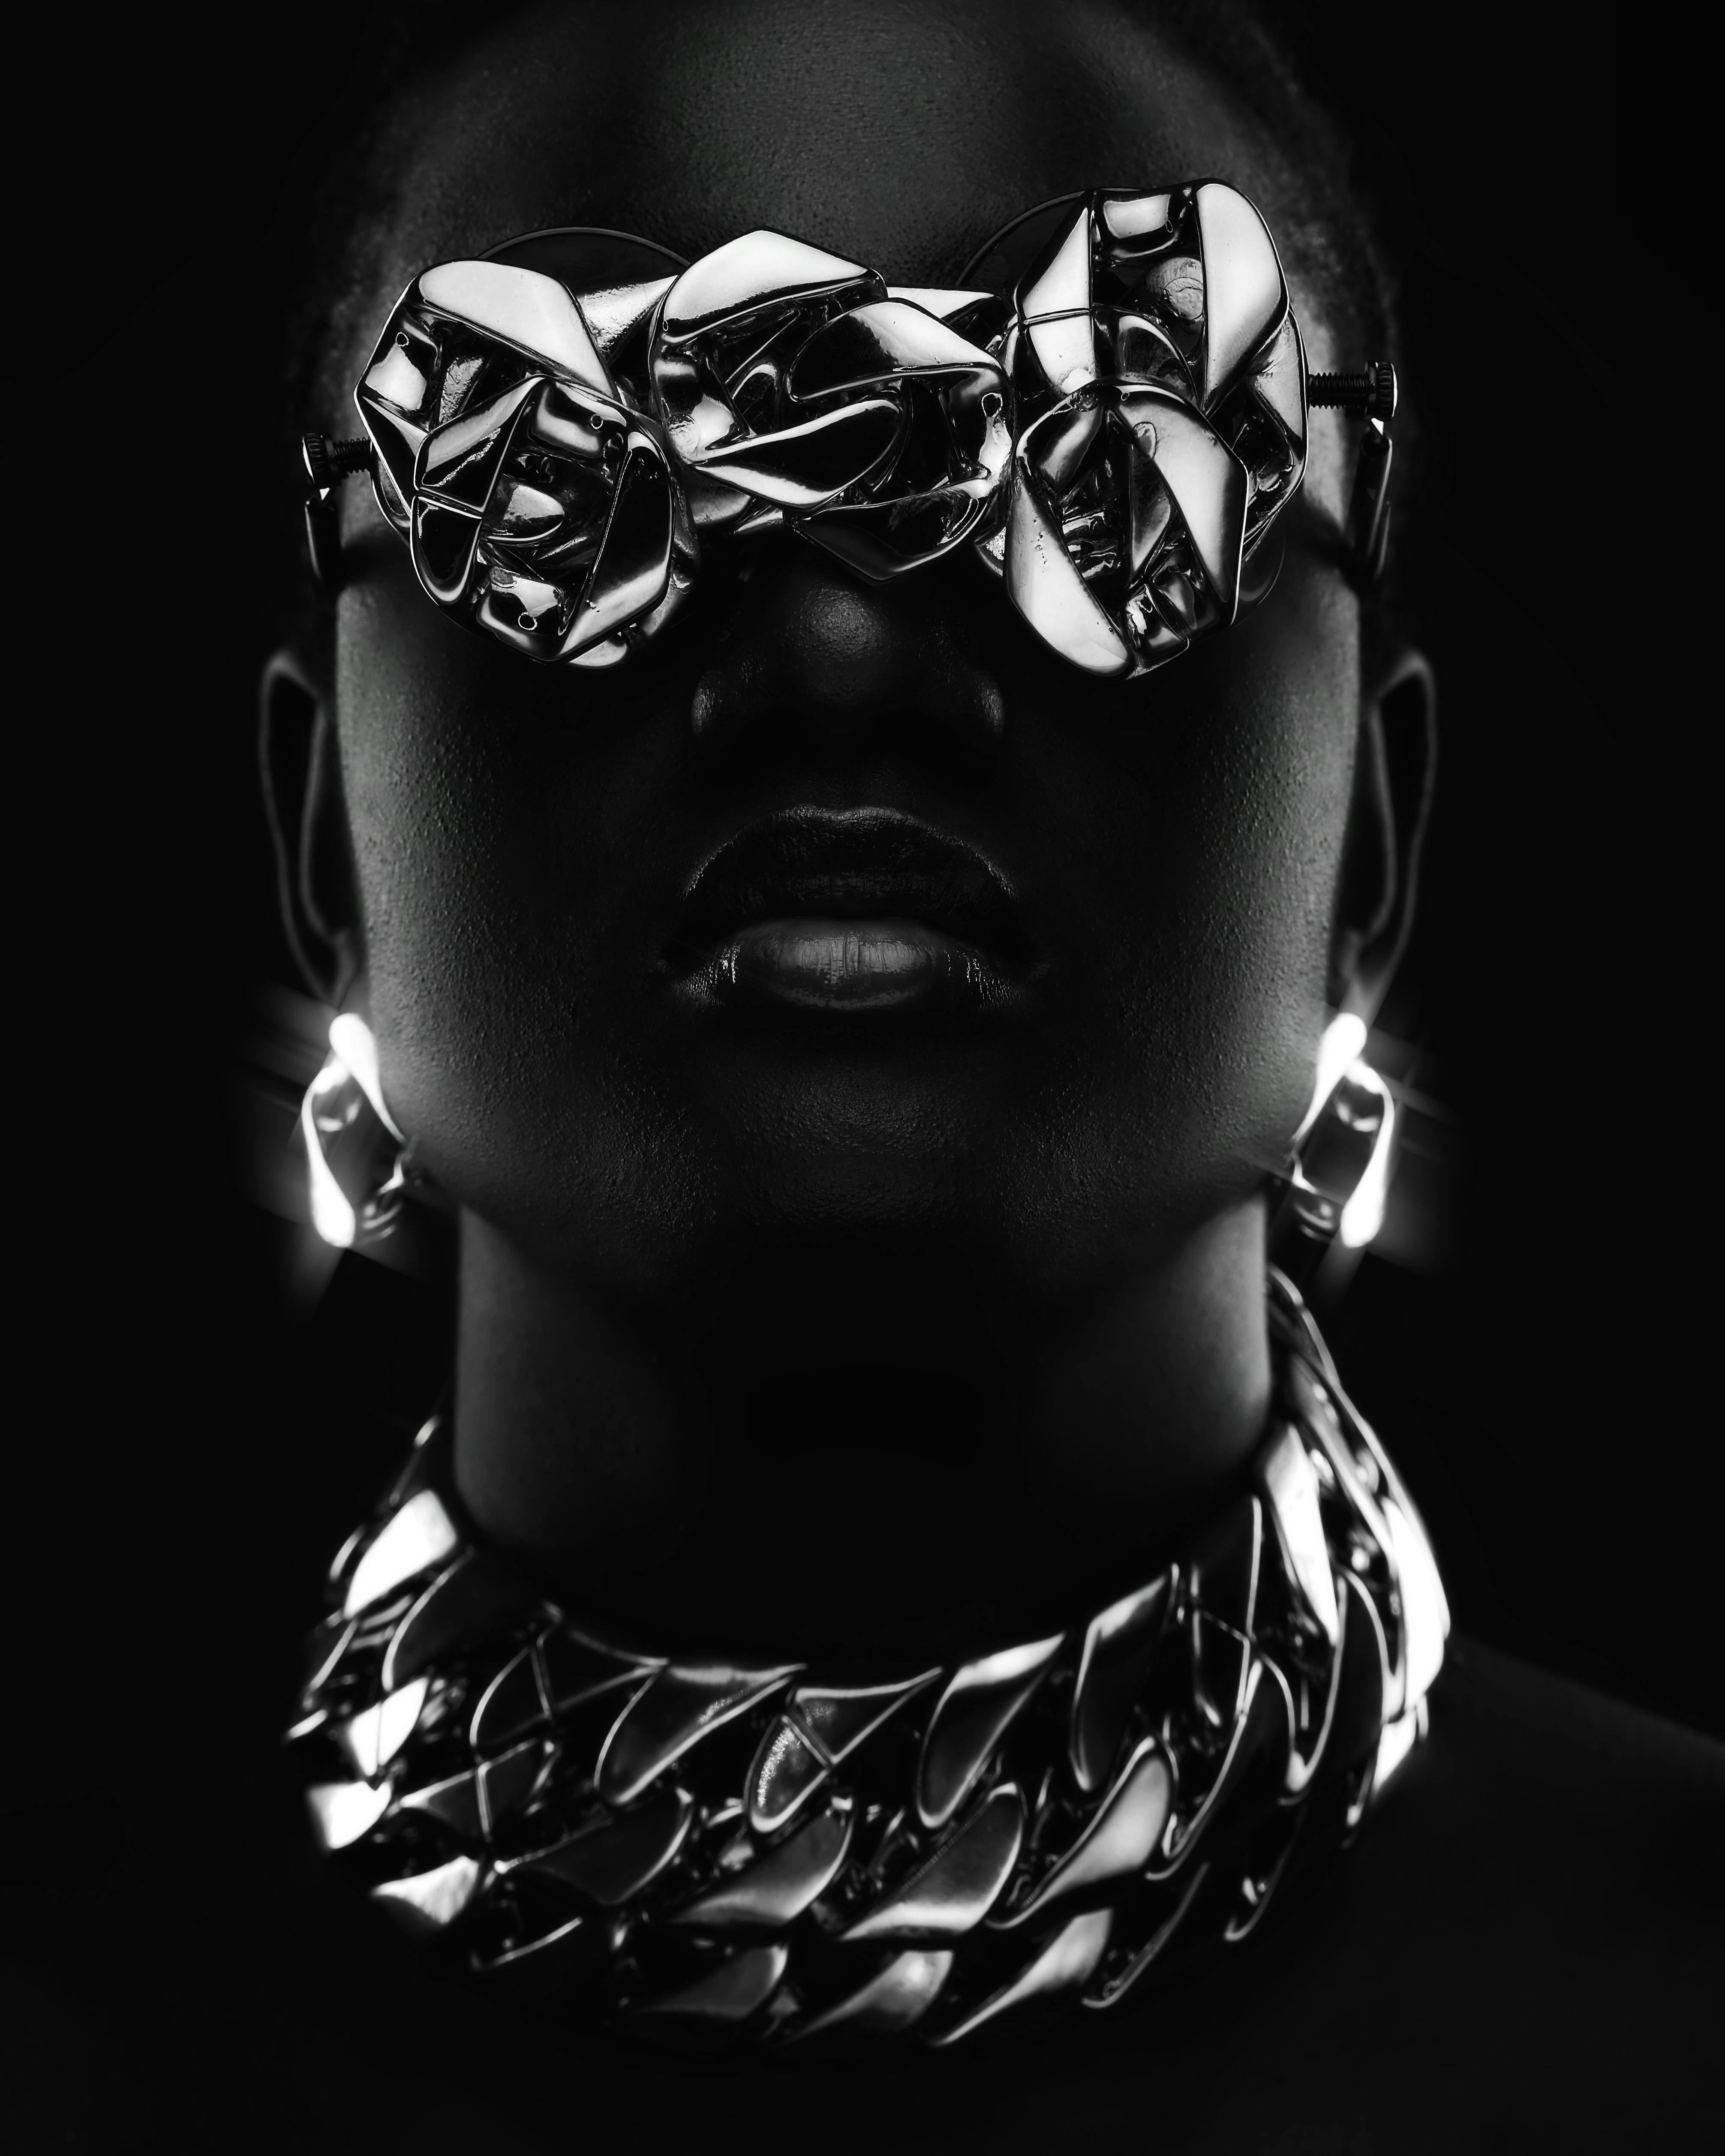 Woman with chains stock image. Image of artistic, black - 17985109